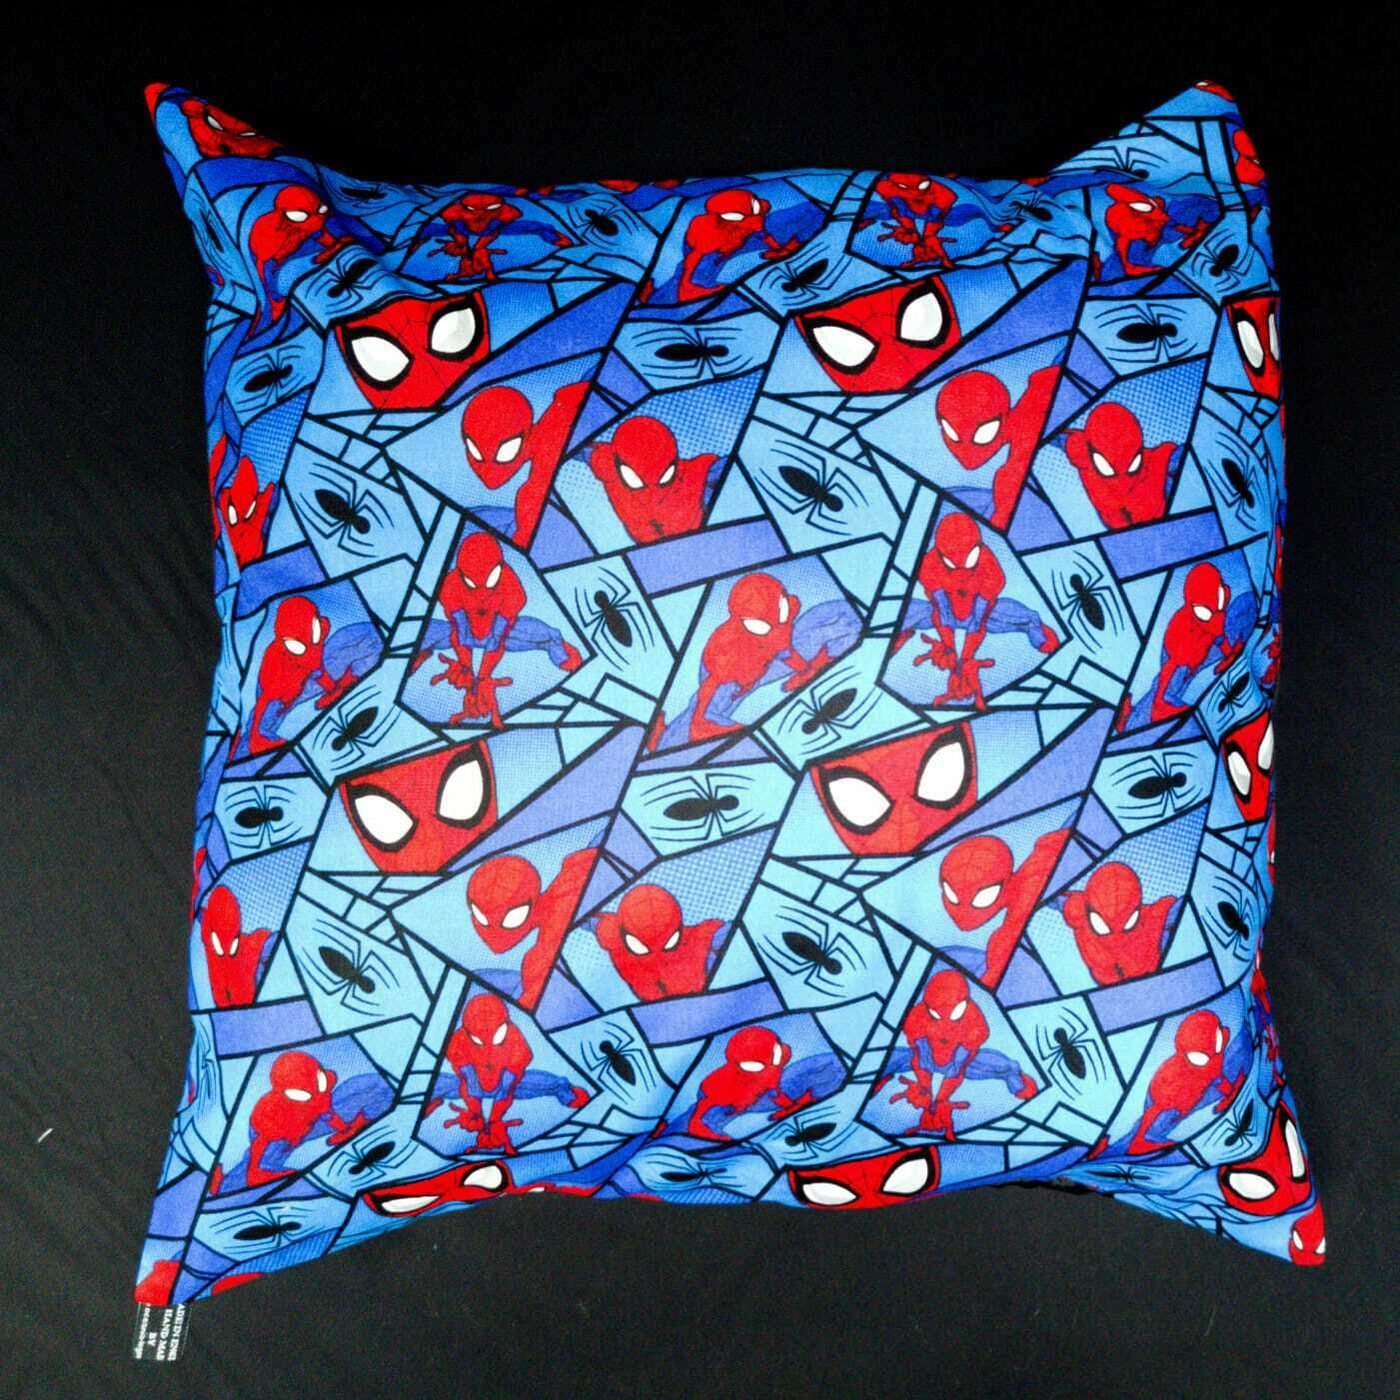 Spiderman Marvel Superhero Hero Spider Man Cushion Cover Case to fit 18" x 18"